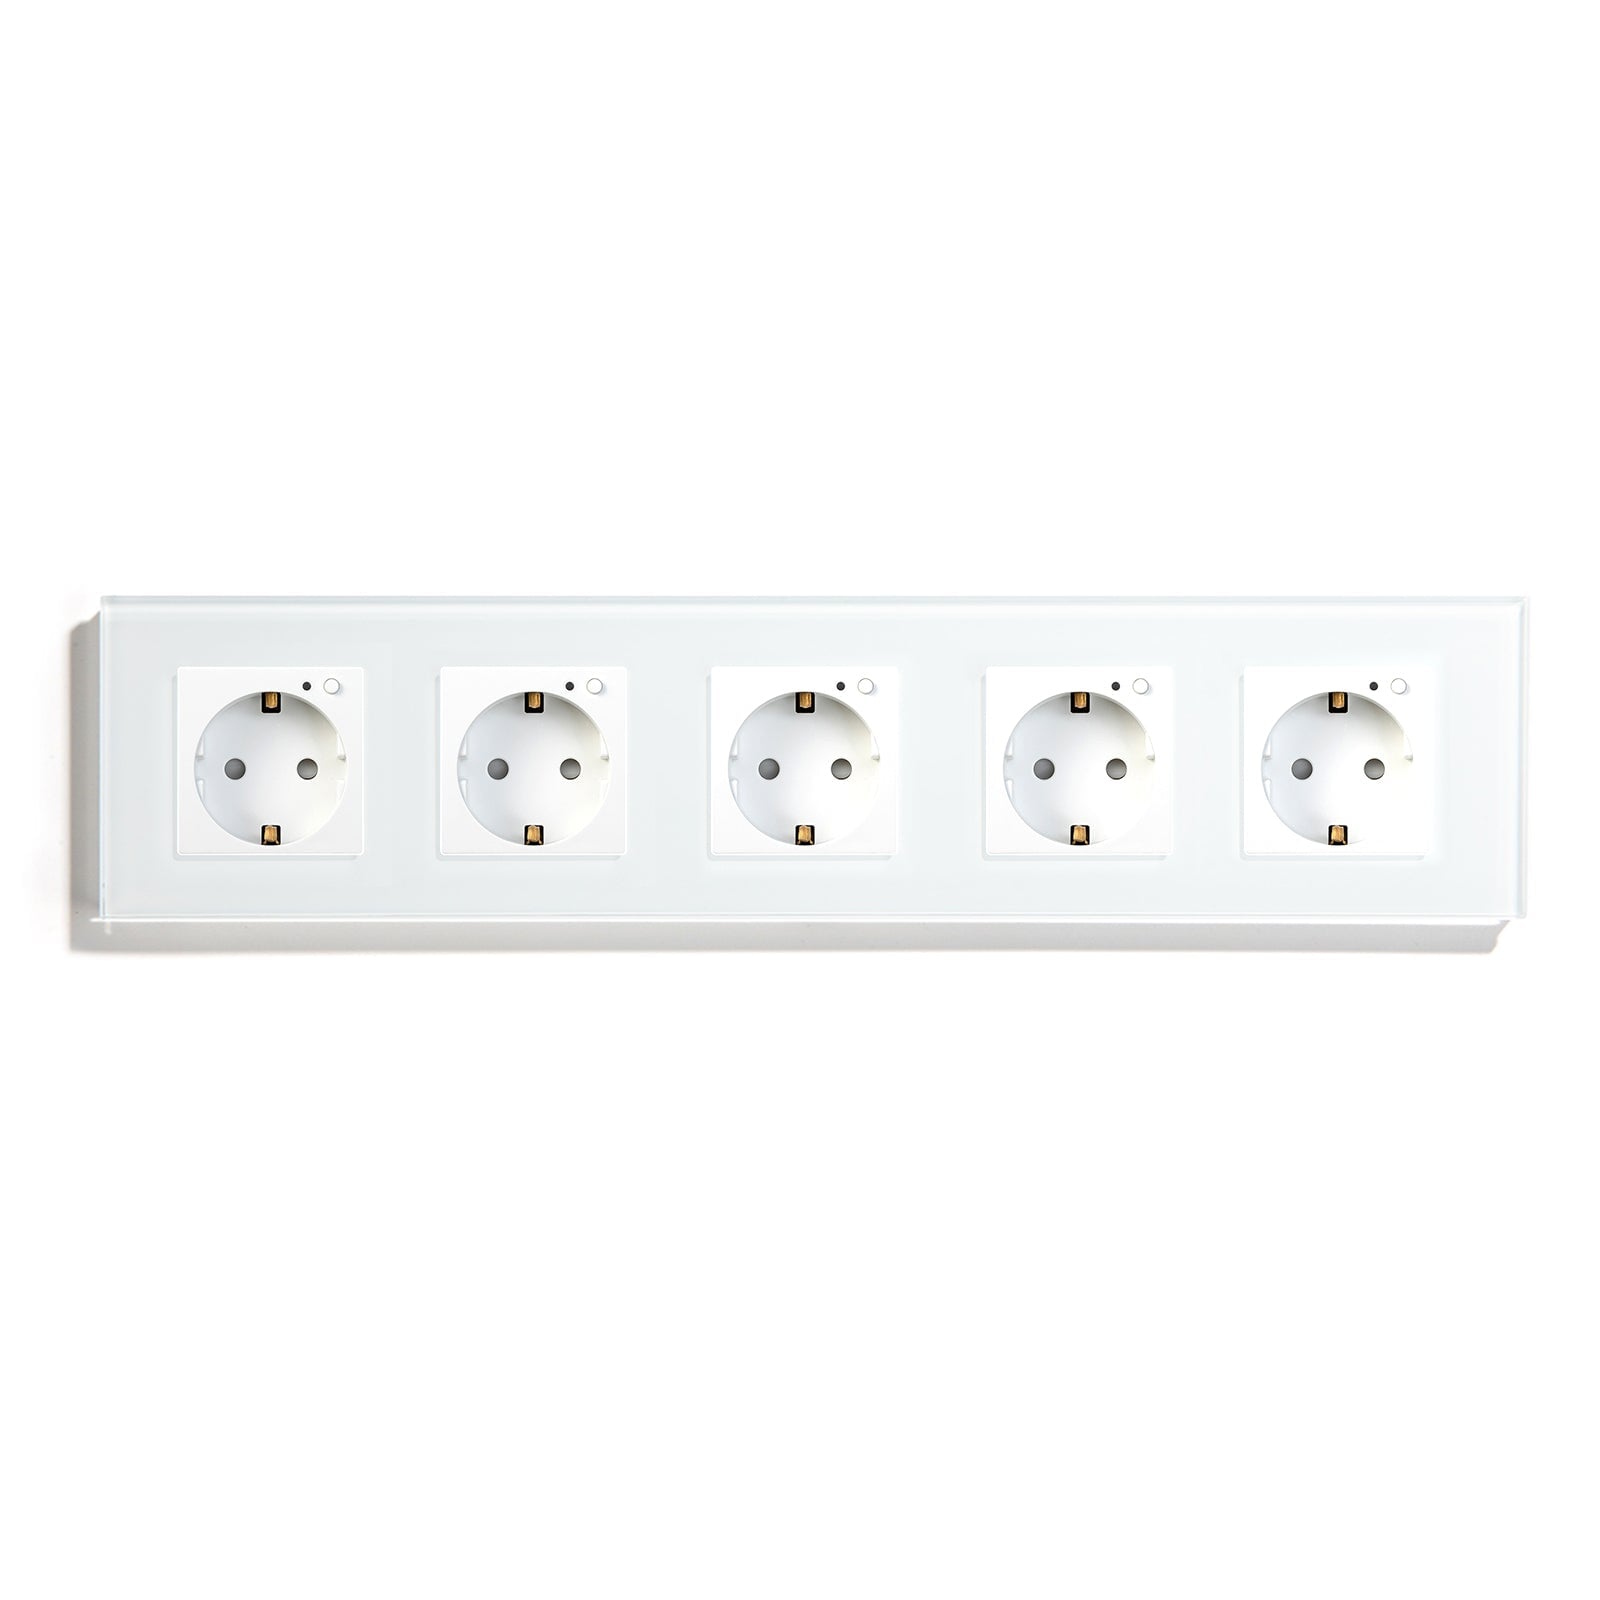 BSEED Wifi EU Wall Sockets Single Power Outlets Kids Protection Wall Plates & Covers Bseedswitch white Quintuple 